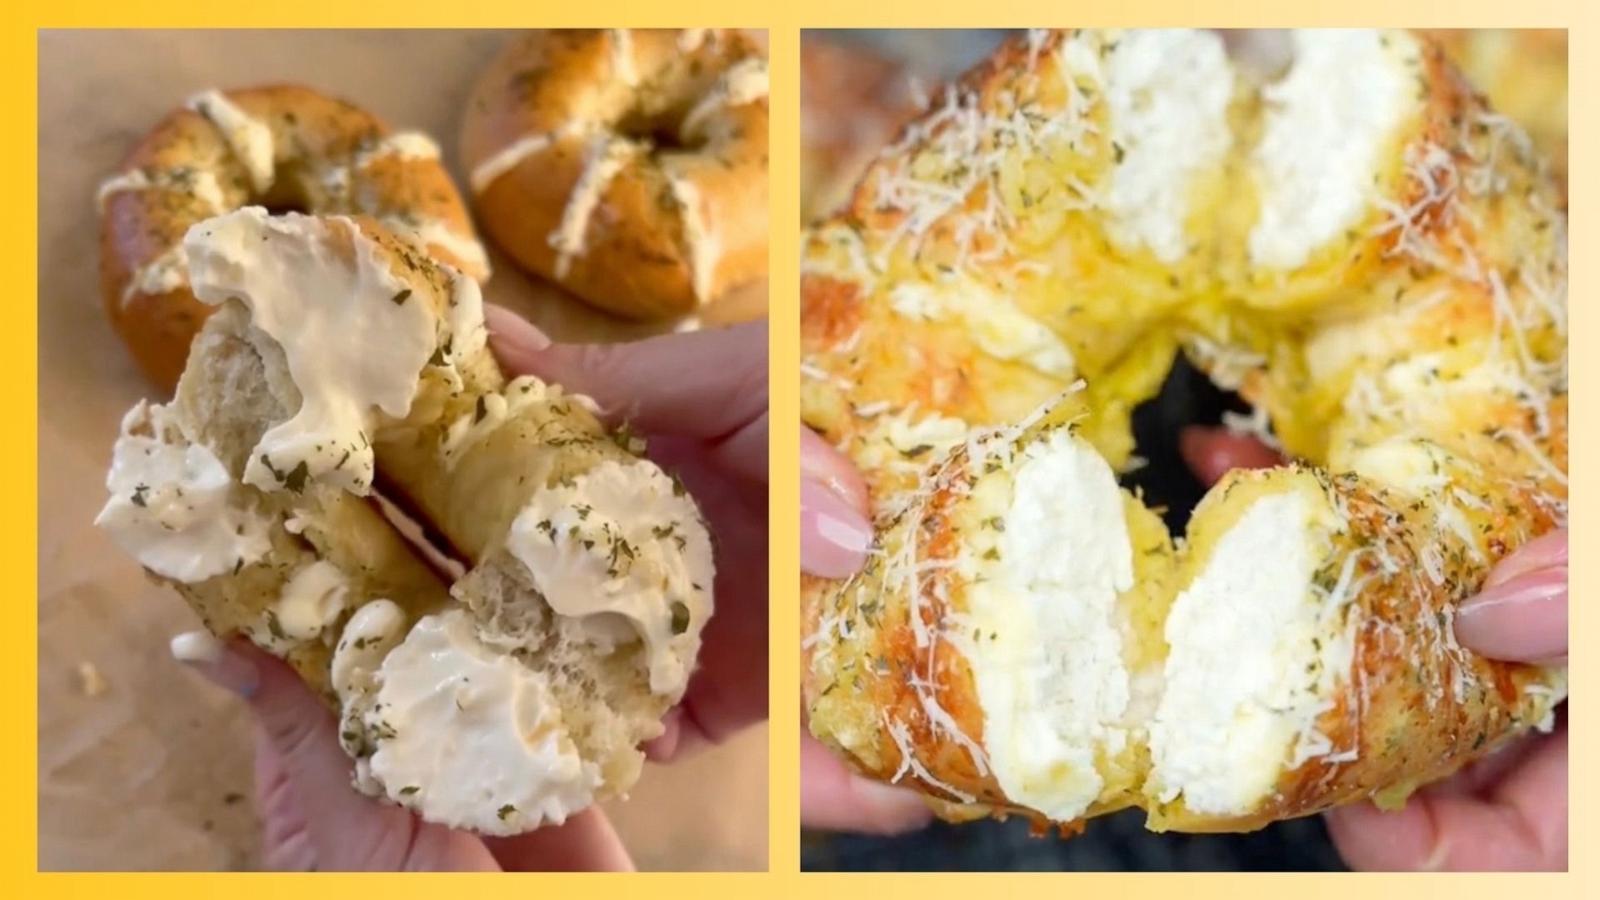 PHOTO: Two homemade versions of the viral stuffed bagels made famous by Calic Bagel in Los Angeles.